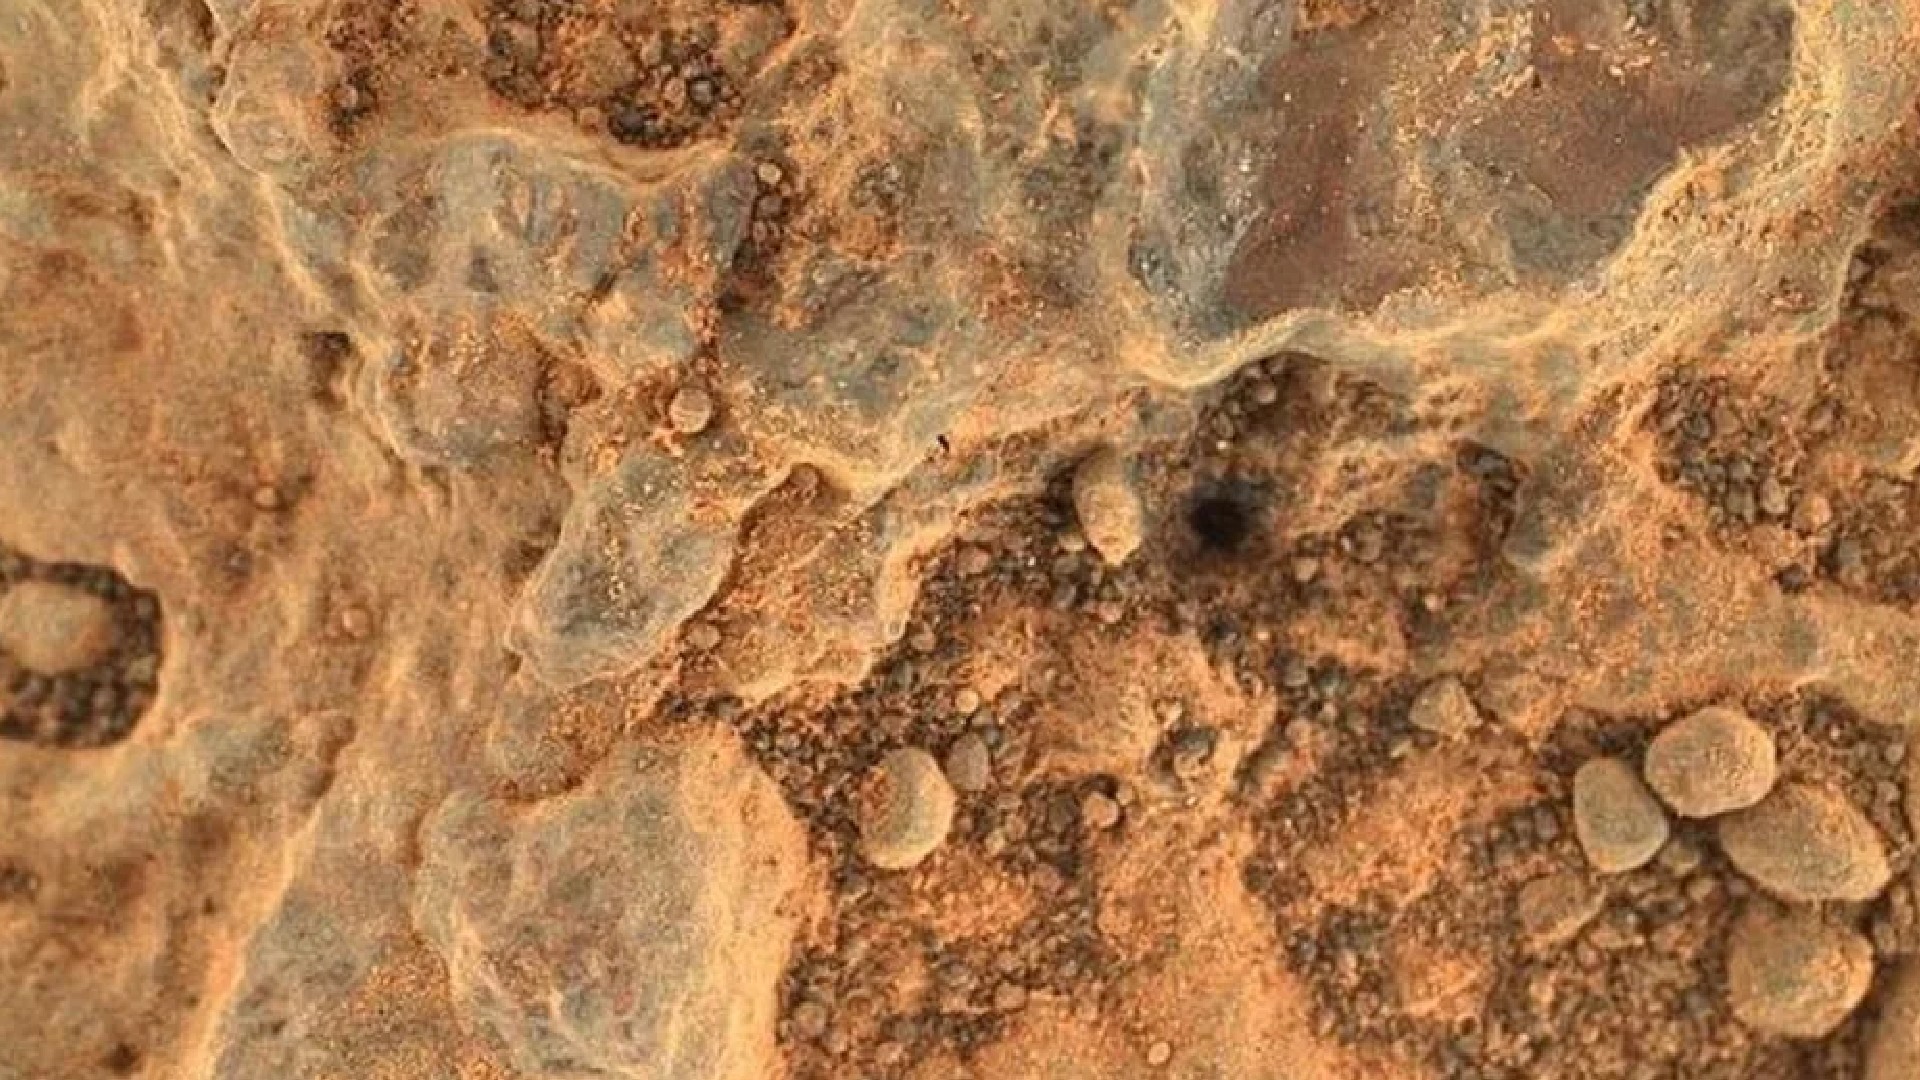 Ingenuity Mars Helicopter Snaps Images Of The Red Planet!